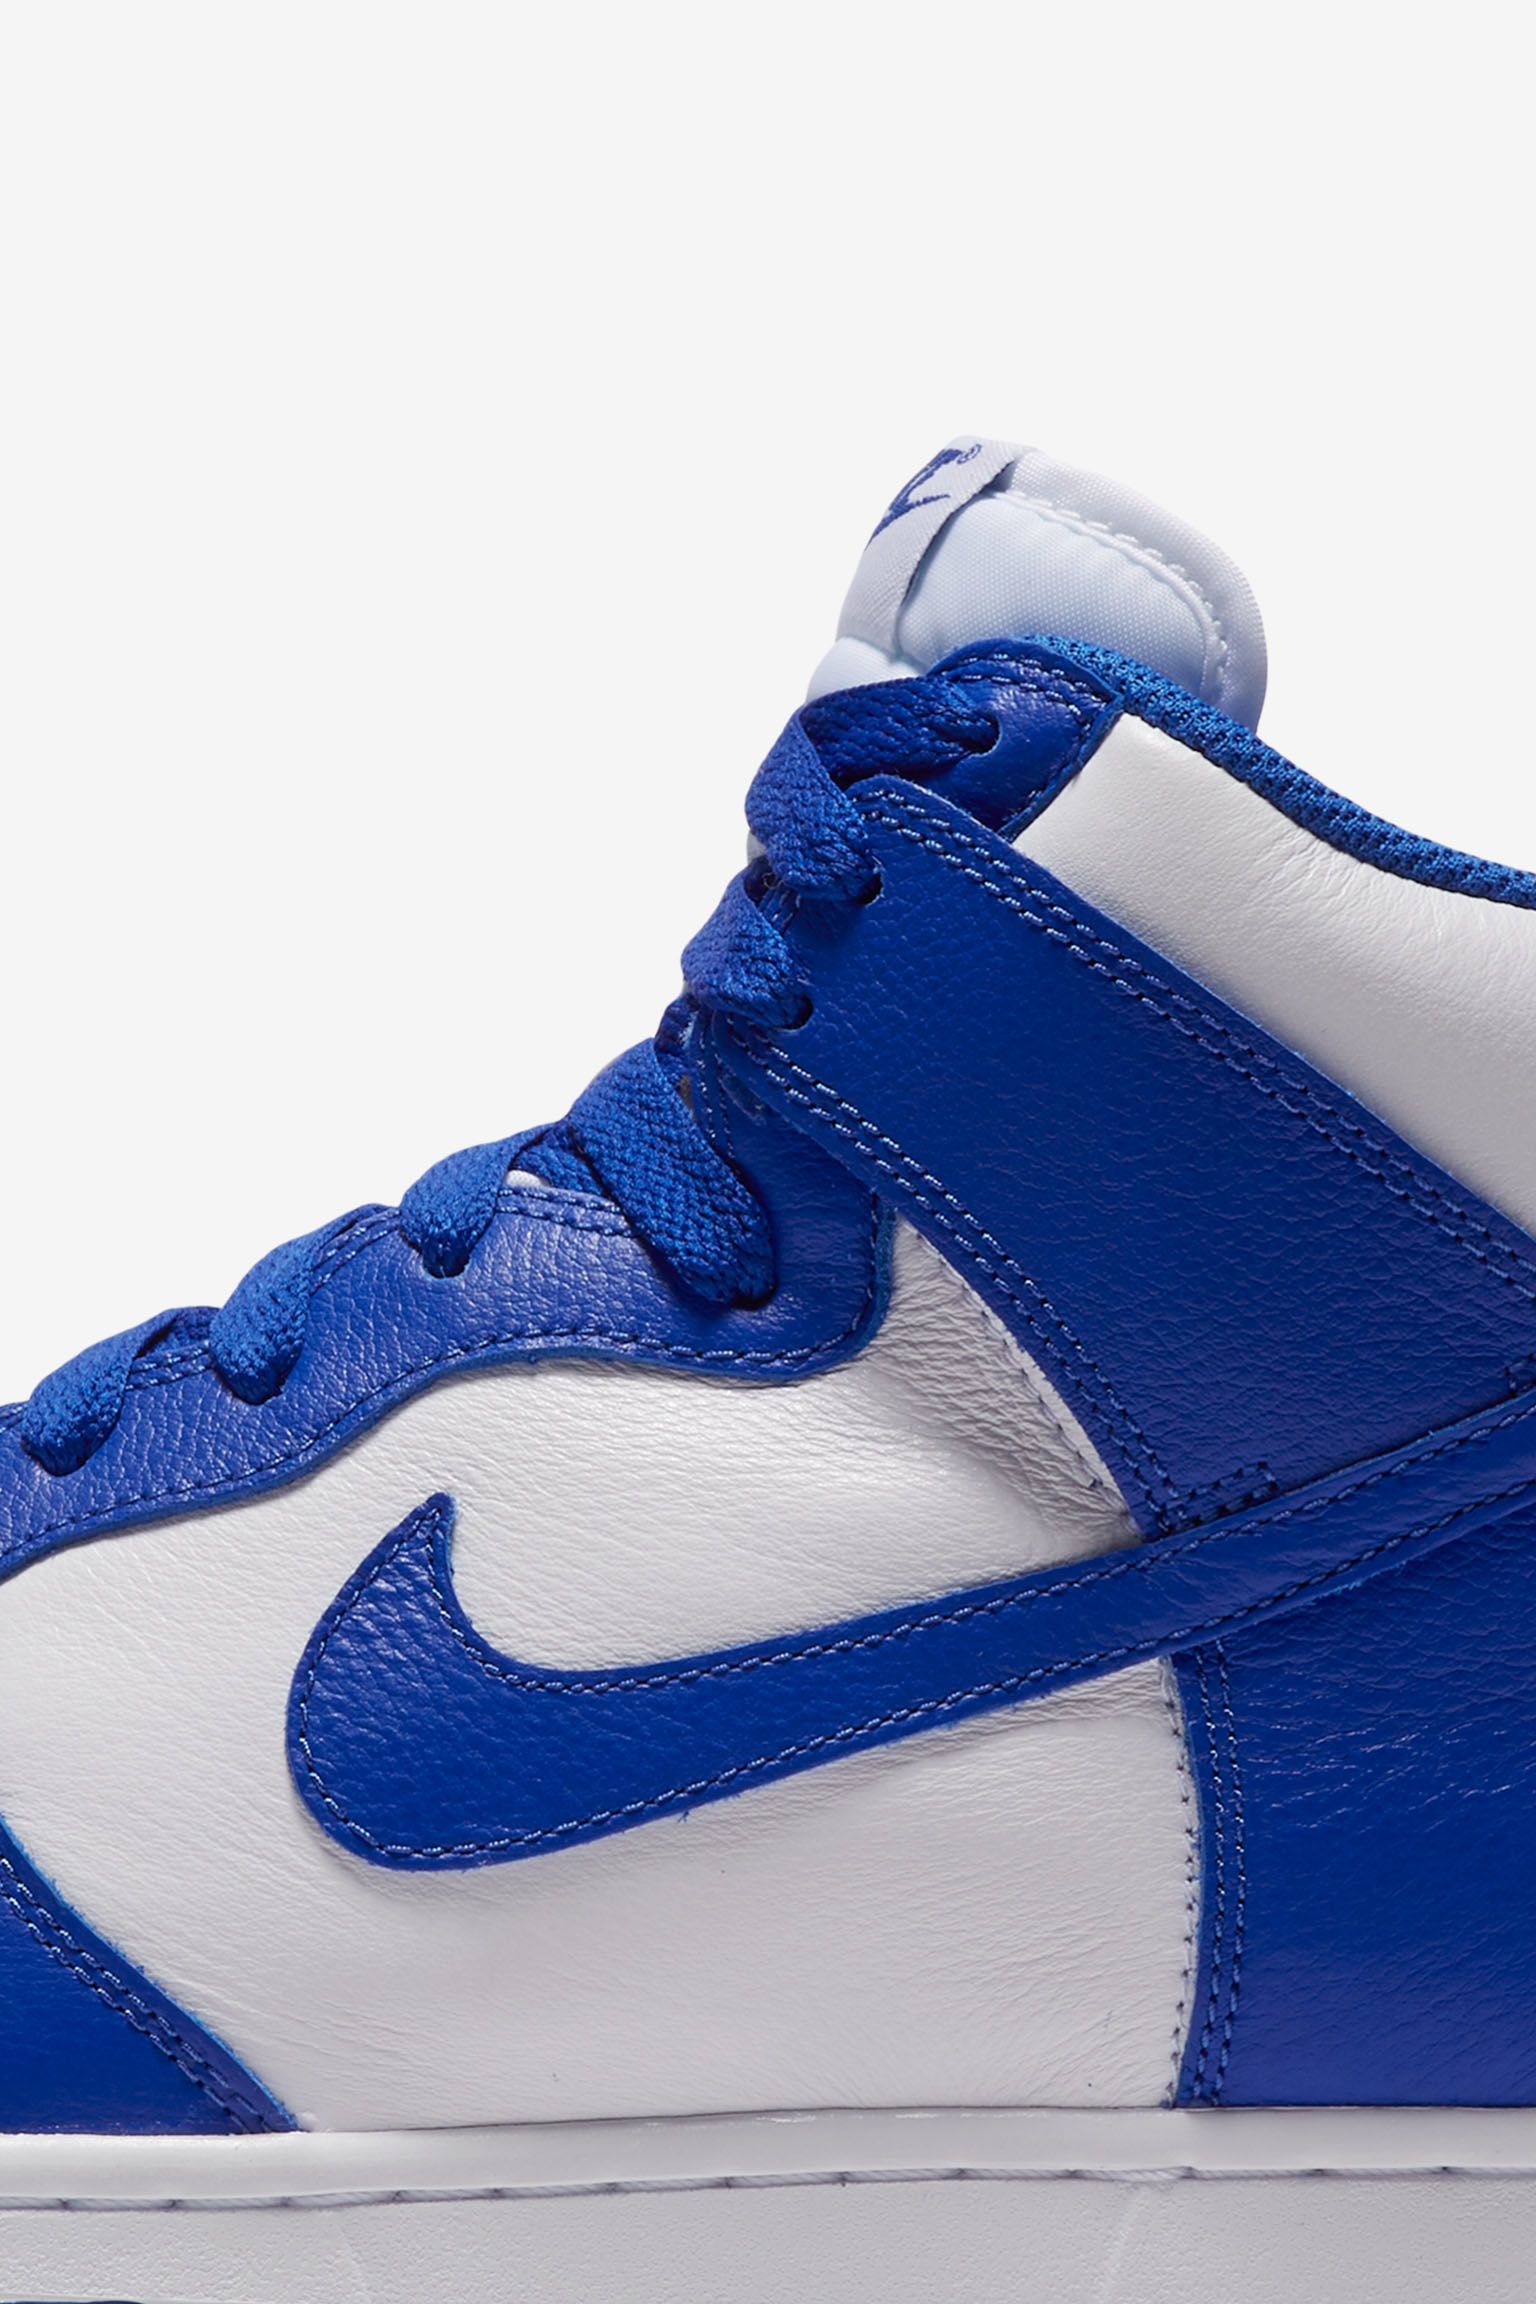 Nike Dunk College Colors 'Blue & White'. Nike SNKRS